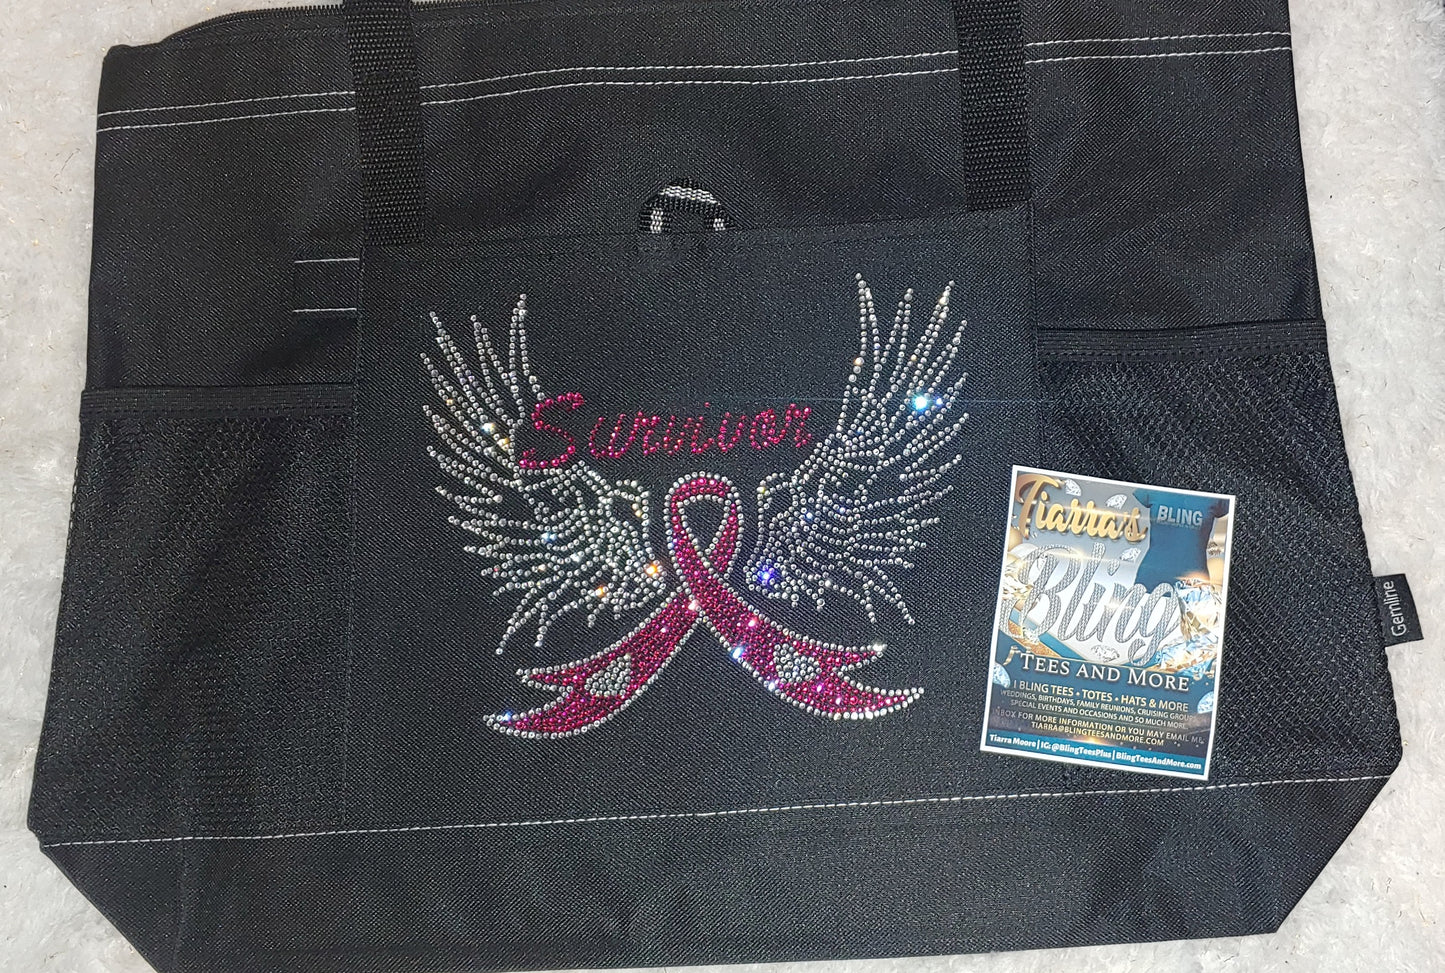 Rhinestone Breast Cancer Survivor with Wings Tote - Multiple Colors Available